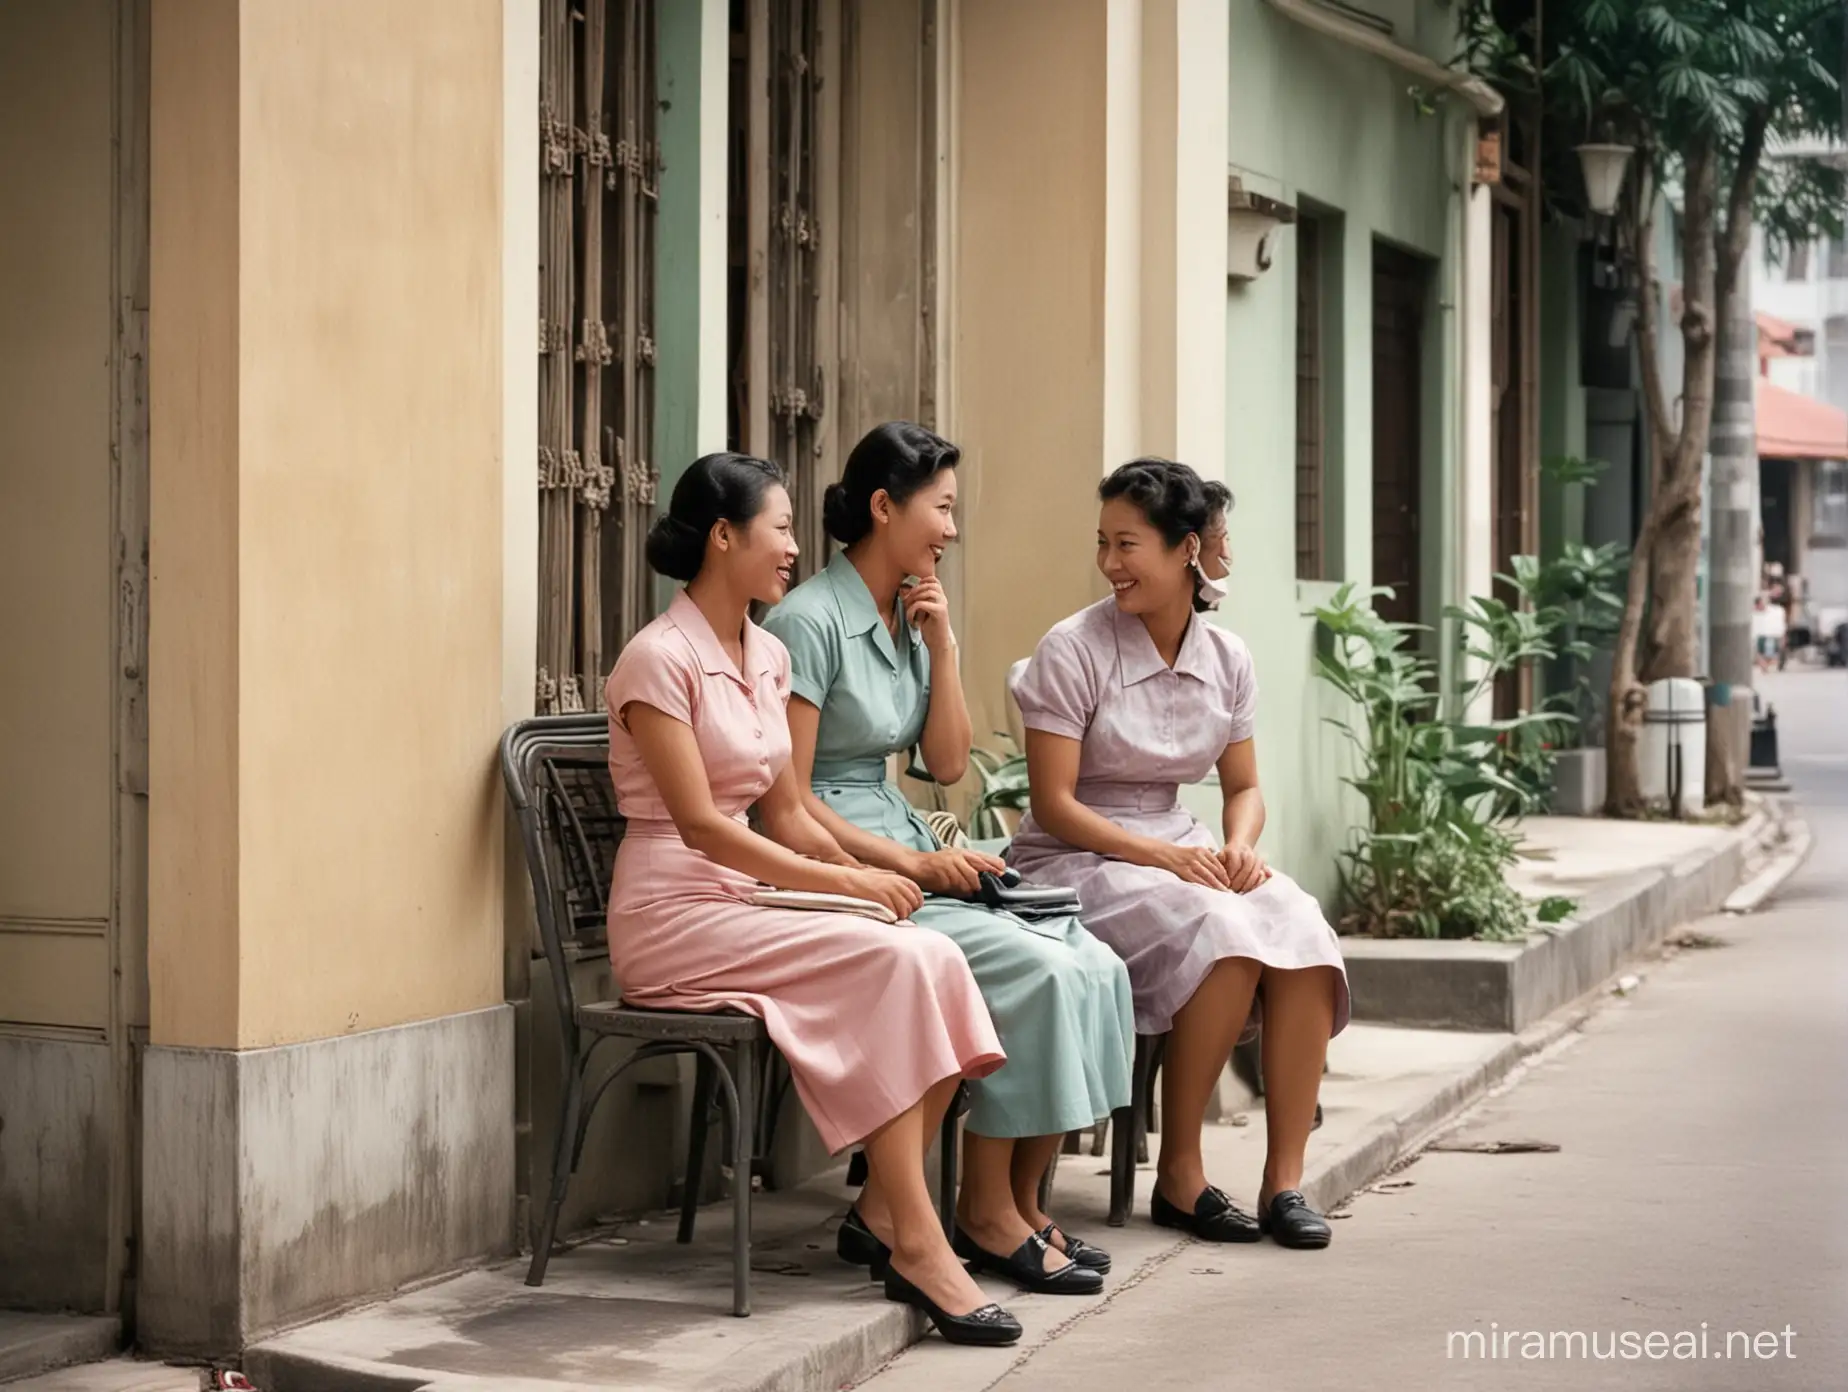 Colorful Scene of 1950s Singapore Amahs Engaging in Street Conversation